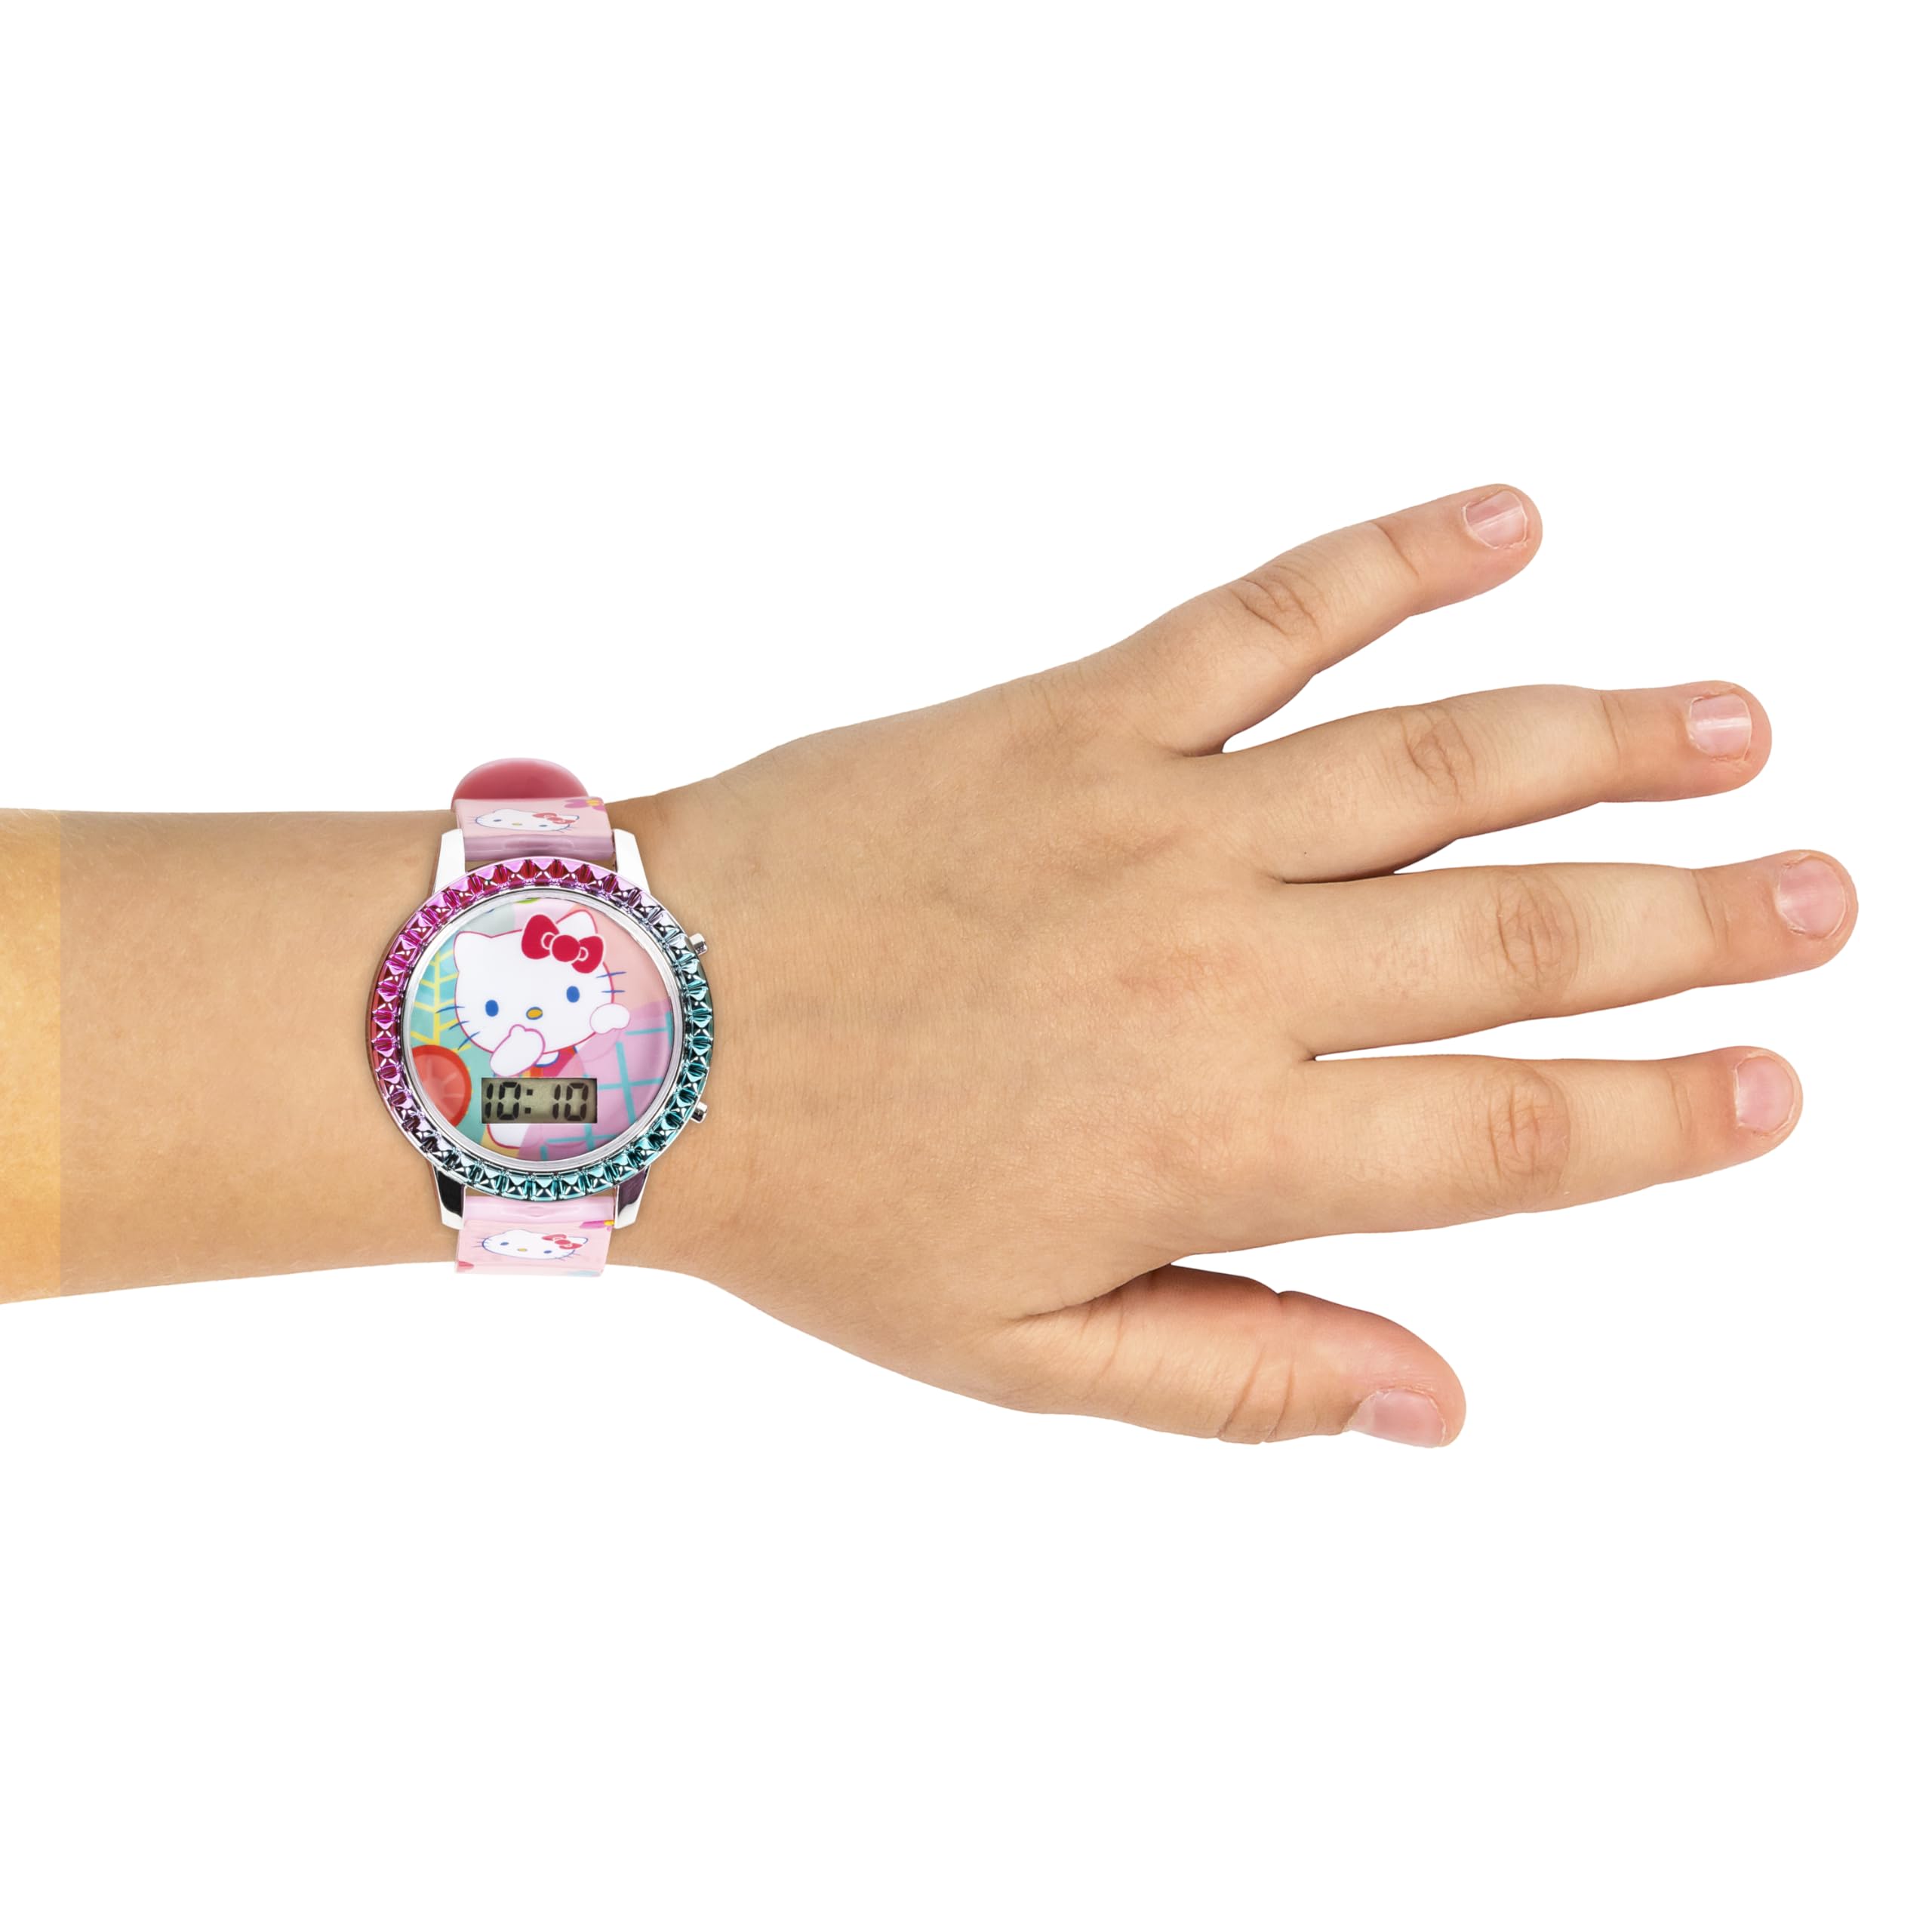 Accutime Hello Kitty Digital LCD Quartz Kids Pink Watch for Girls with Hello Kitty and Friends Pink All Over Print Band Strap (Model: HK4167AZ)